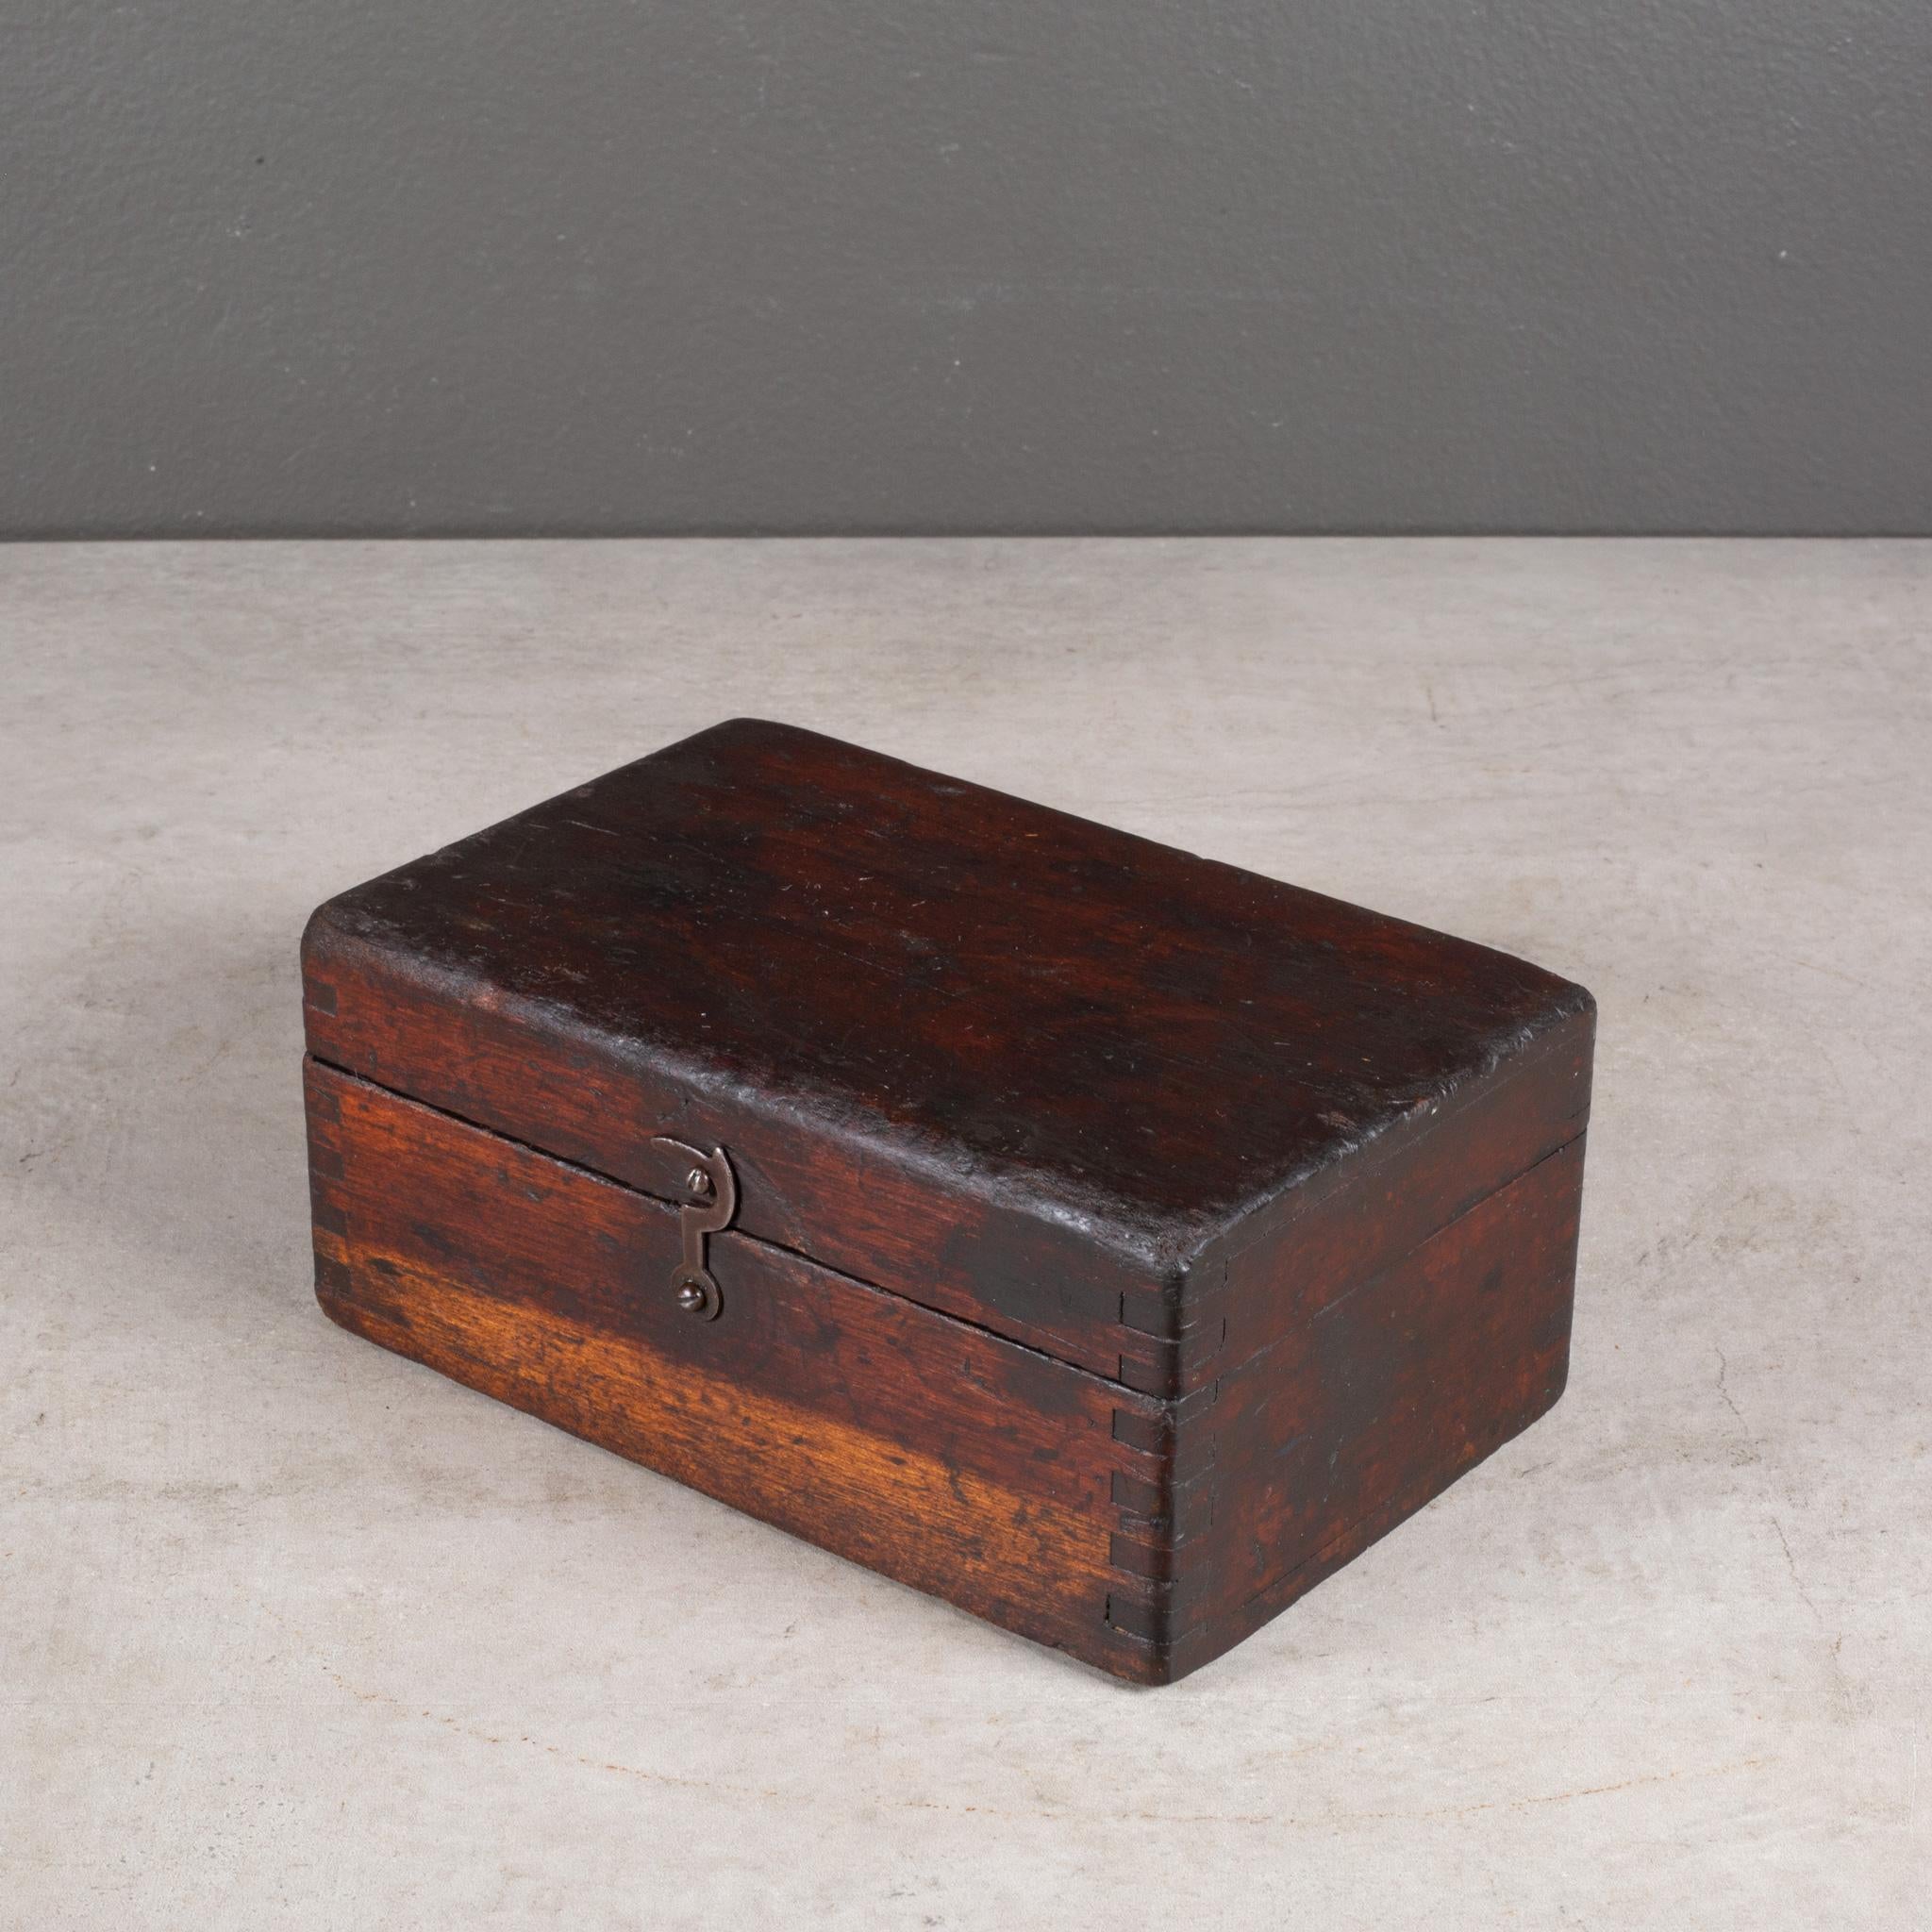 ABOUT

A Walnut machinist's tool box used to store cutting tools for a lathe. Dovetail joints.

    CREATOR Unknown.
    DATE OF MANUFACTURE c.1940-1950.
    MATERIALS AND TECHNIQUES Walnut, New Felt.
    CONDITION Good. Wear consistent with age and